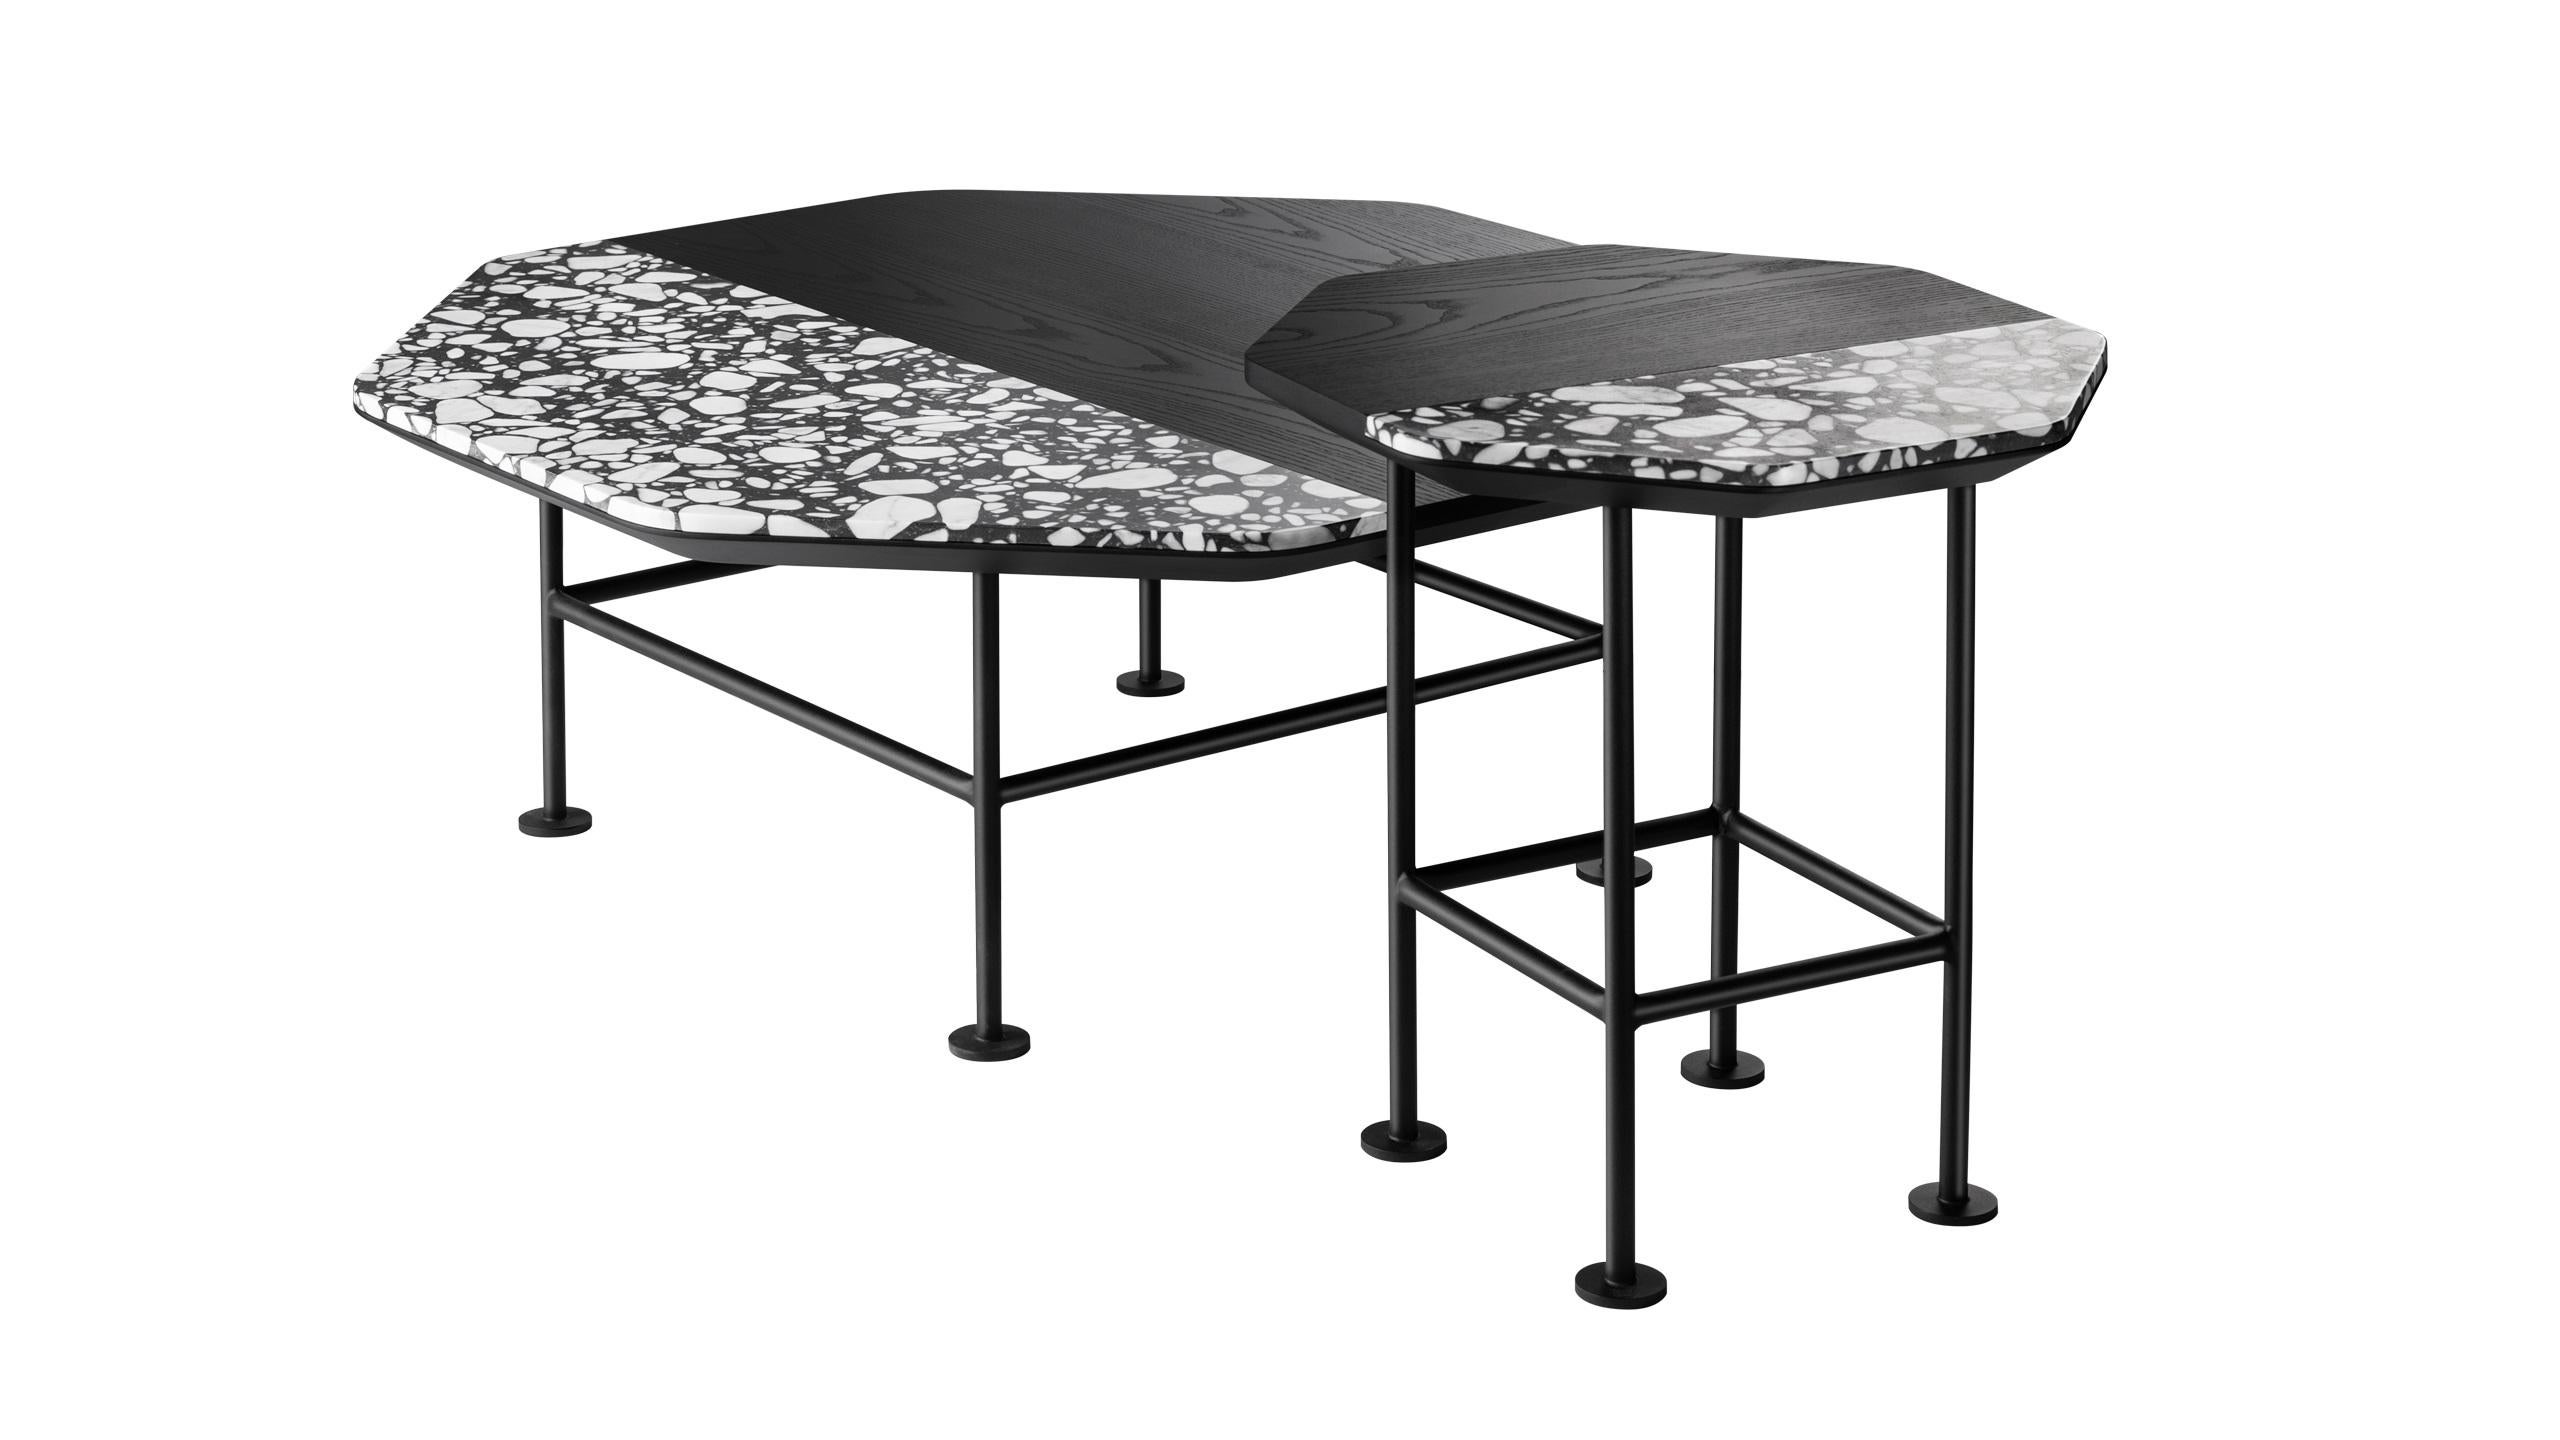 Modern Ringo High Coffee Table in Lacquered Black Legs, by Matteo Zorzenoni For Sale